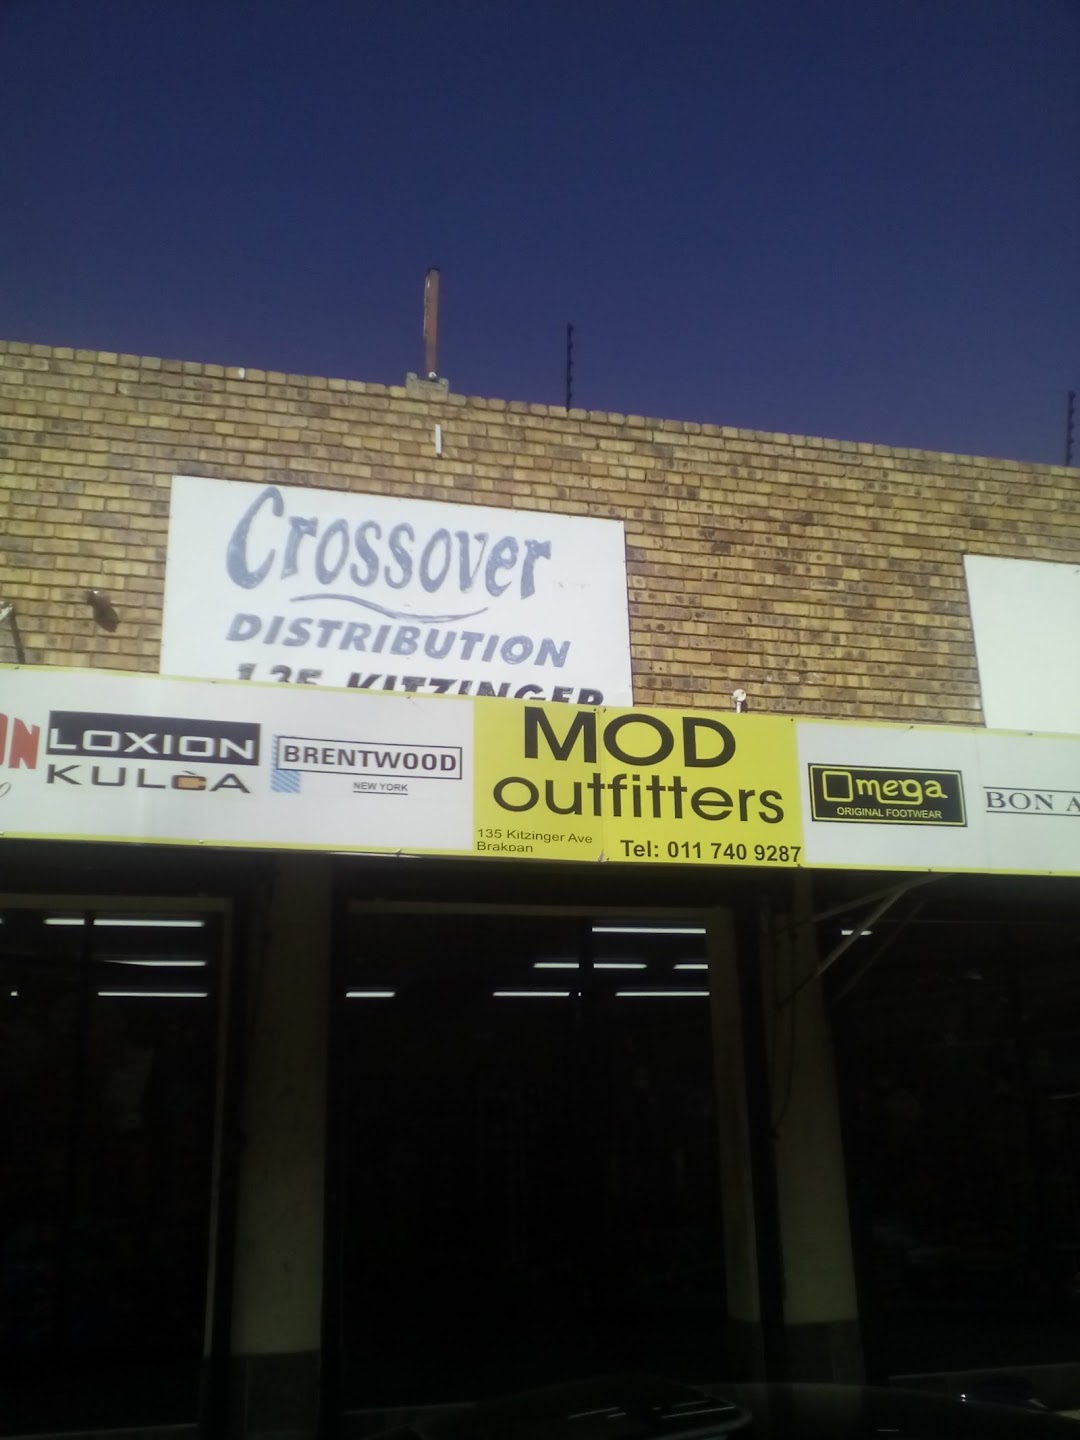 Mod Outfitters